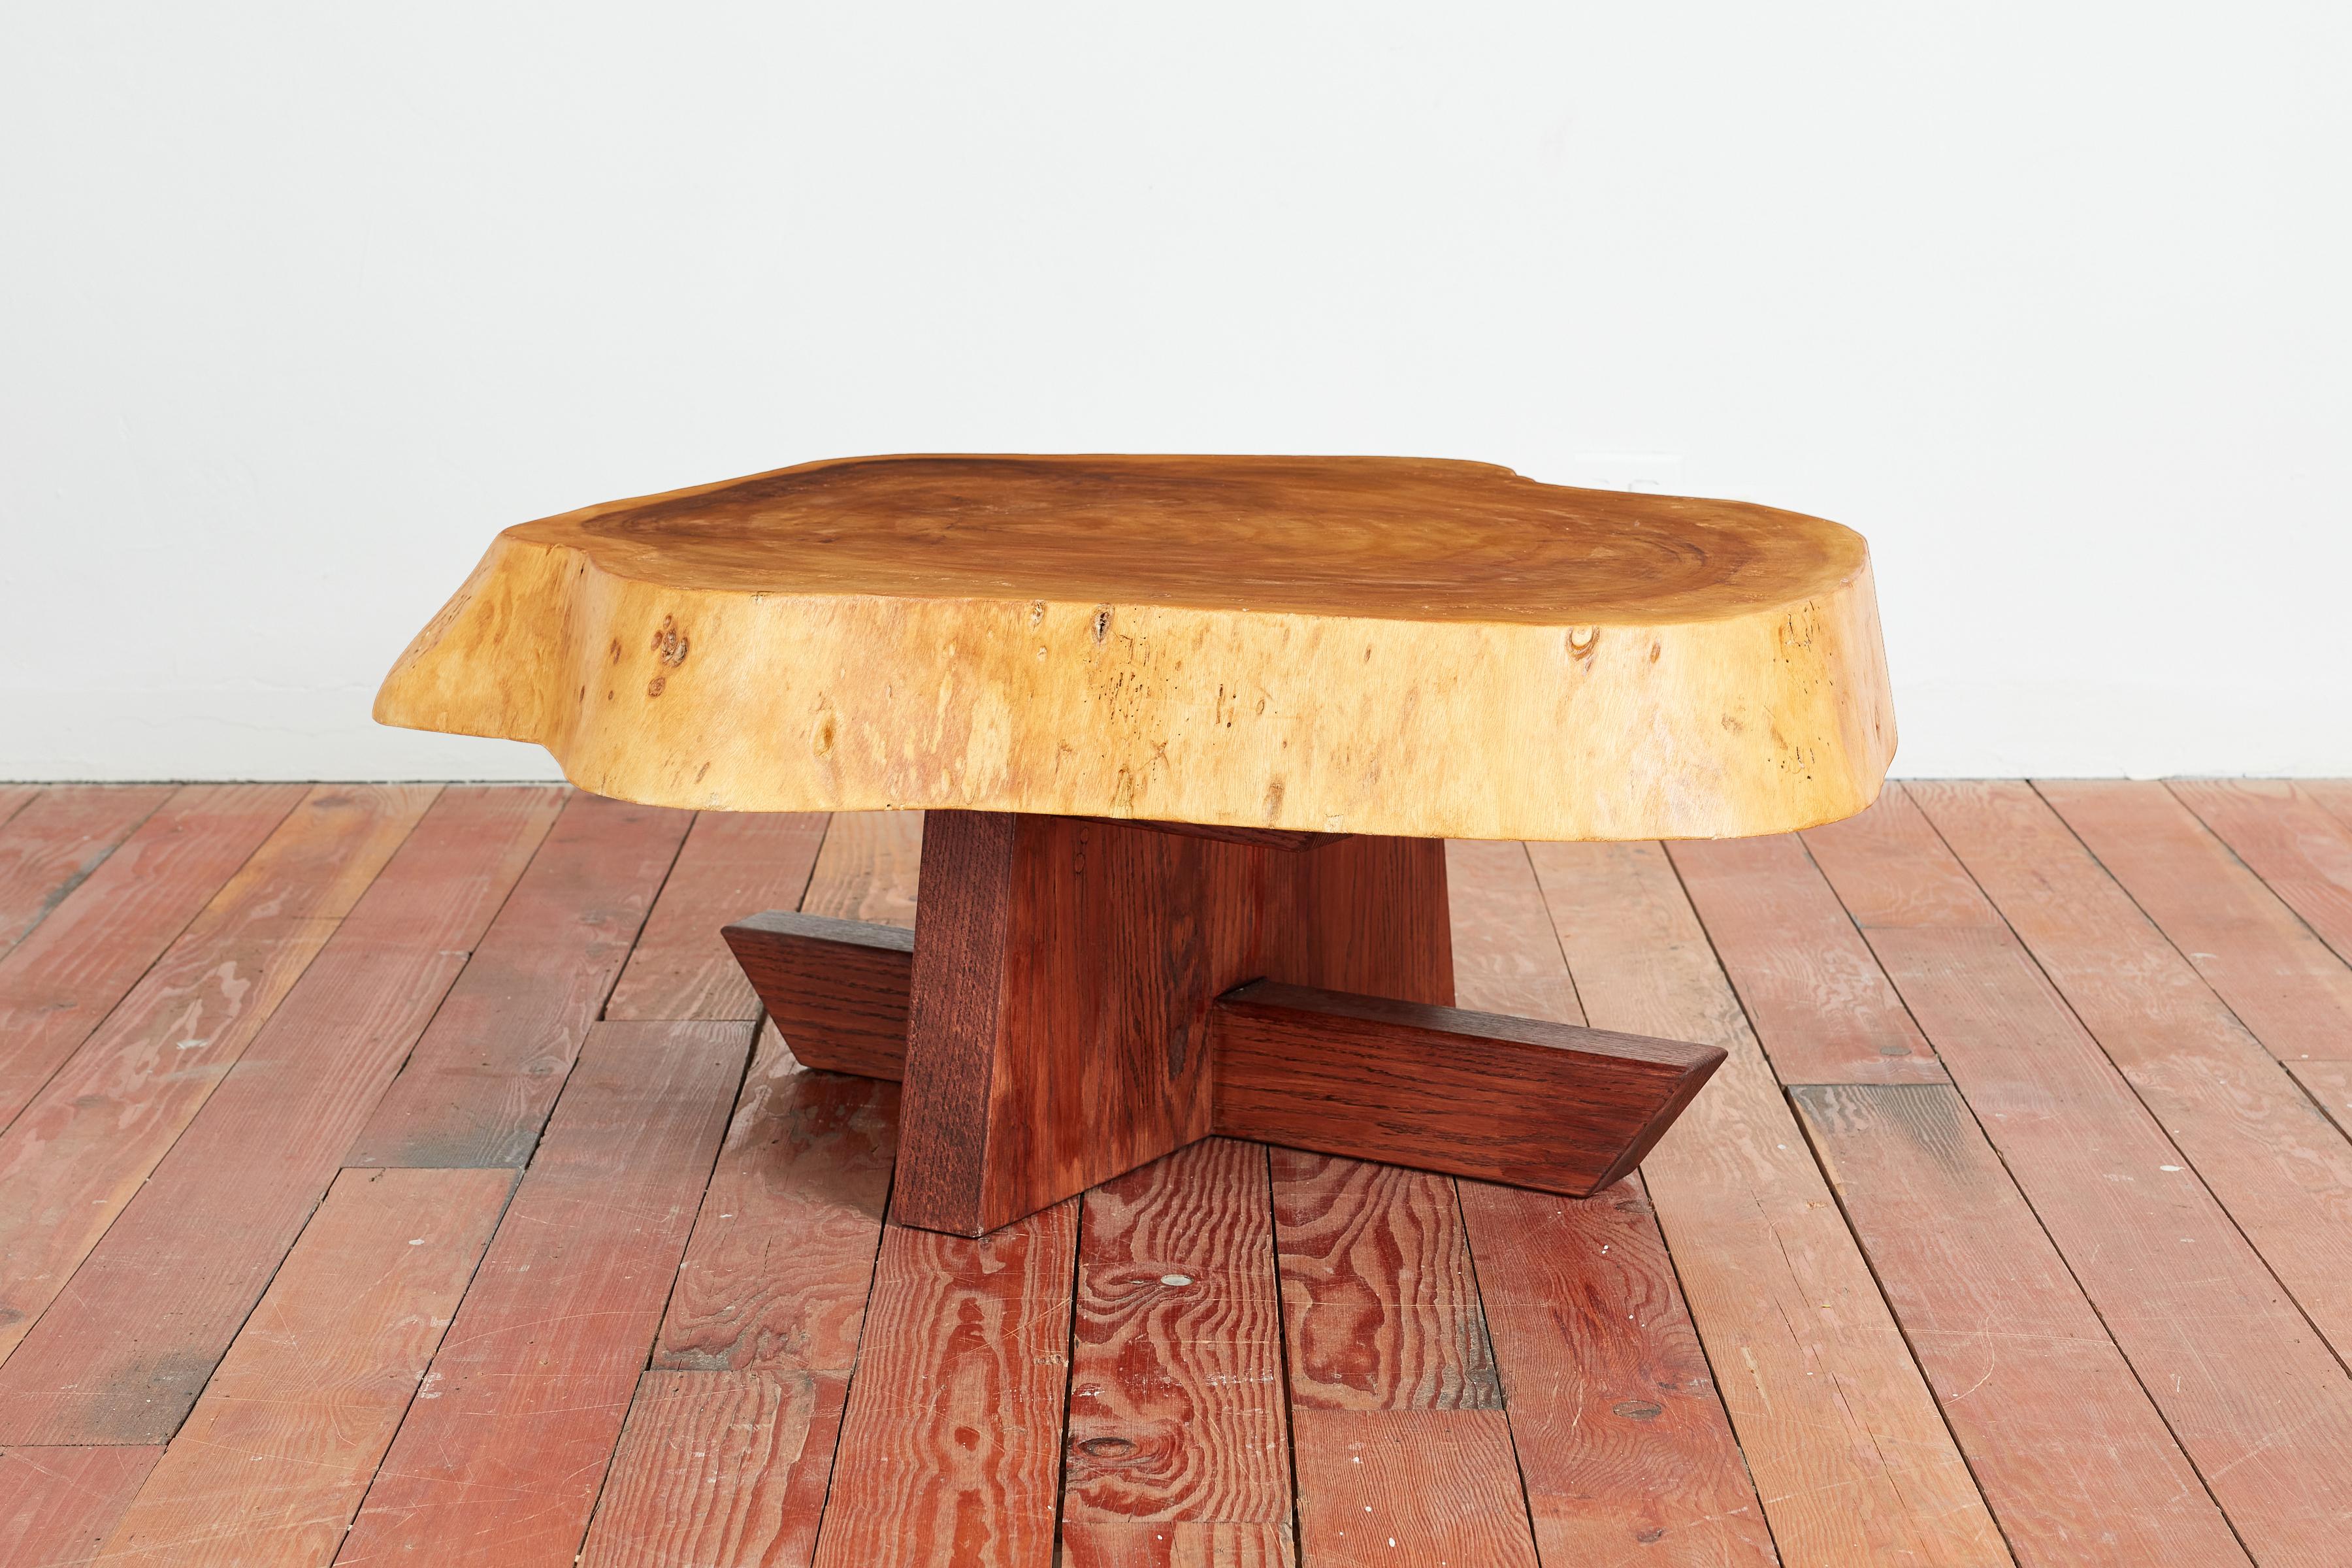 Gorgeous brutalist vintage coffee table constructed of exotic wood 
Beautiful patina and imperfections of the tree
Solid free form shape with organic live edges and angular base. 
France - 1950s 